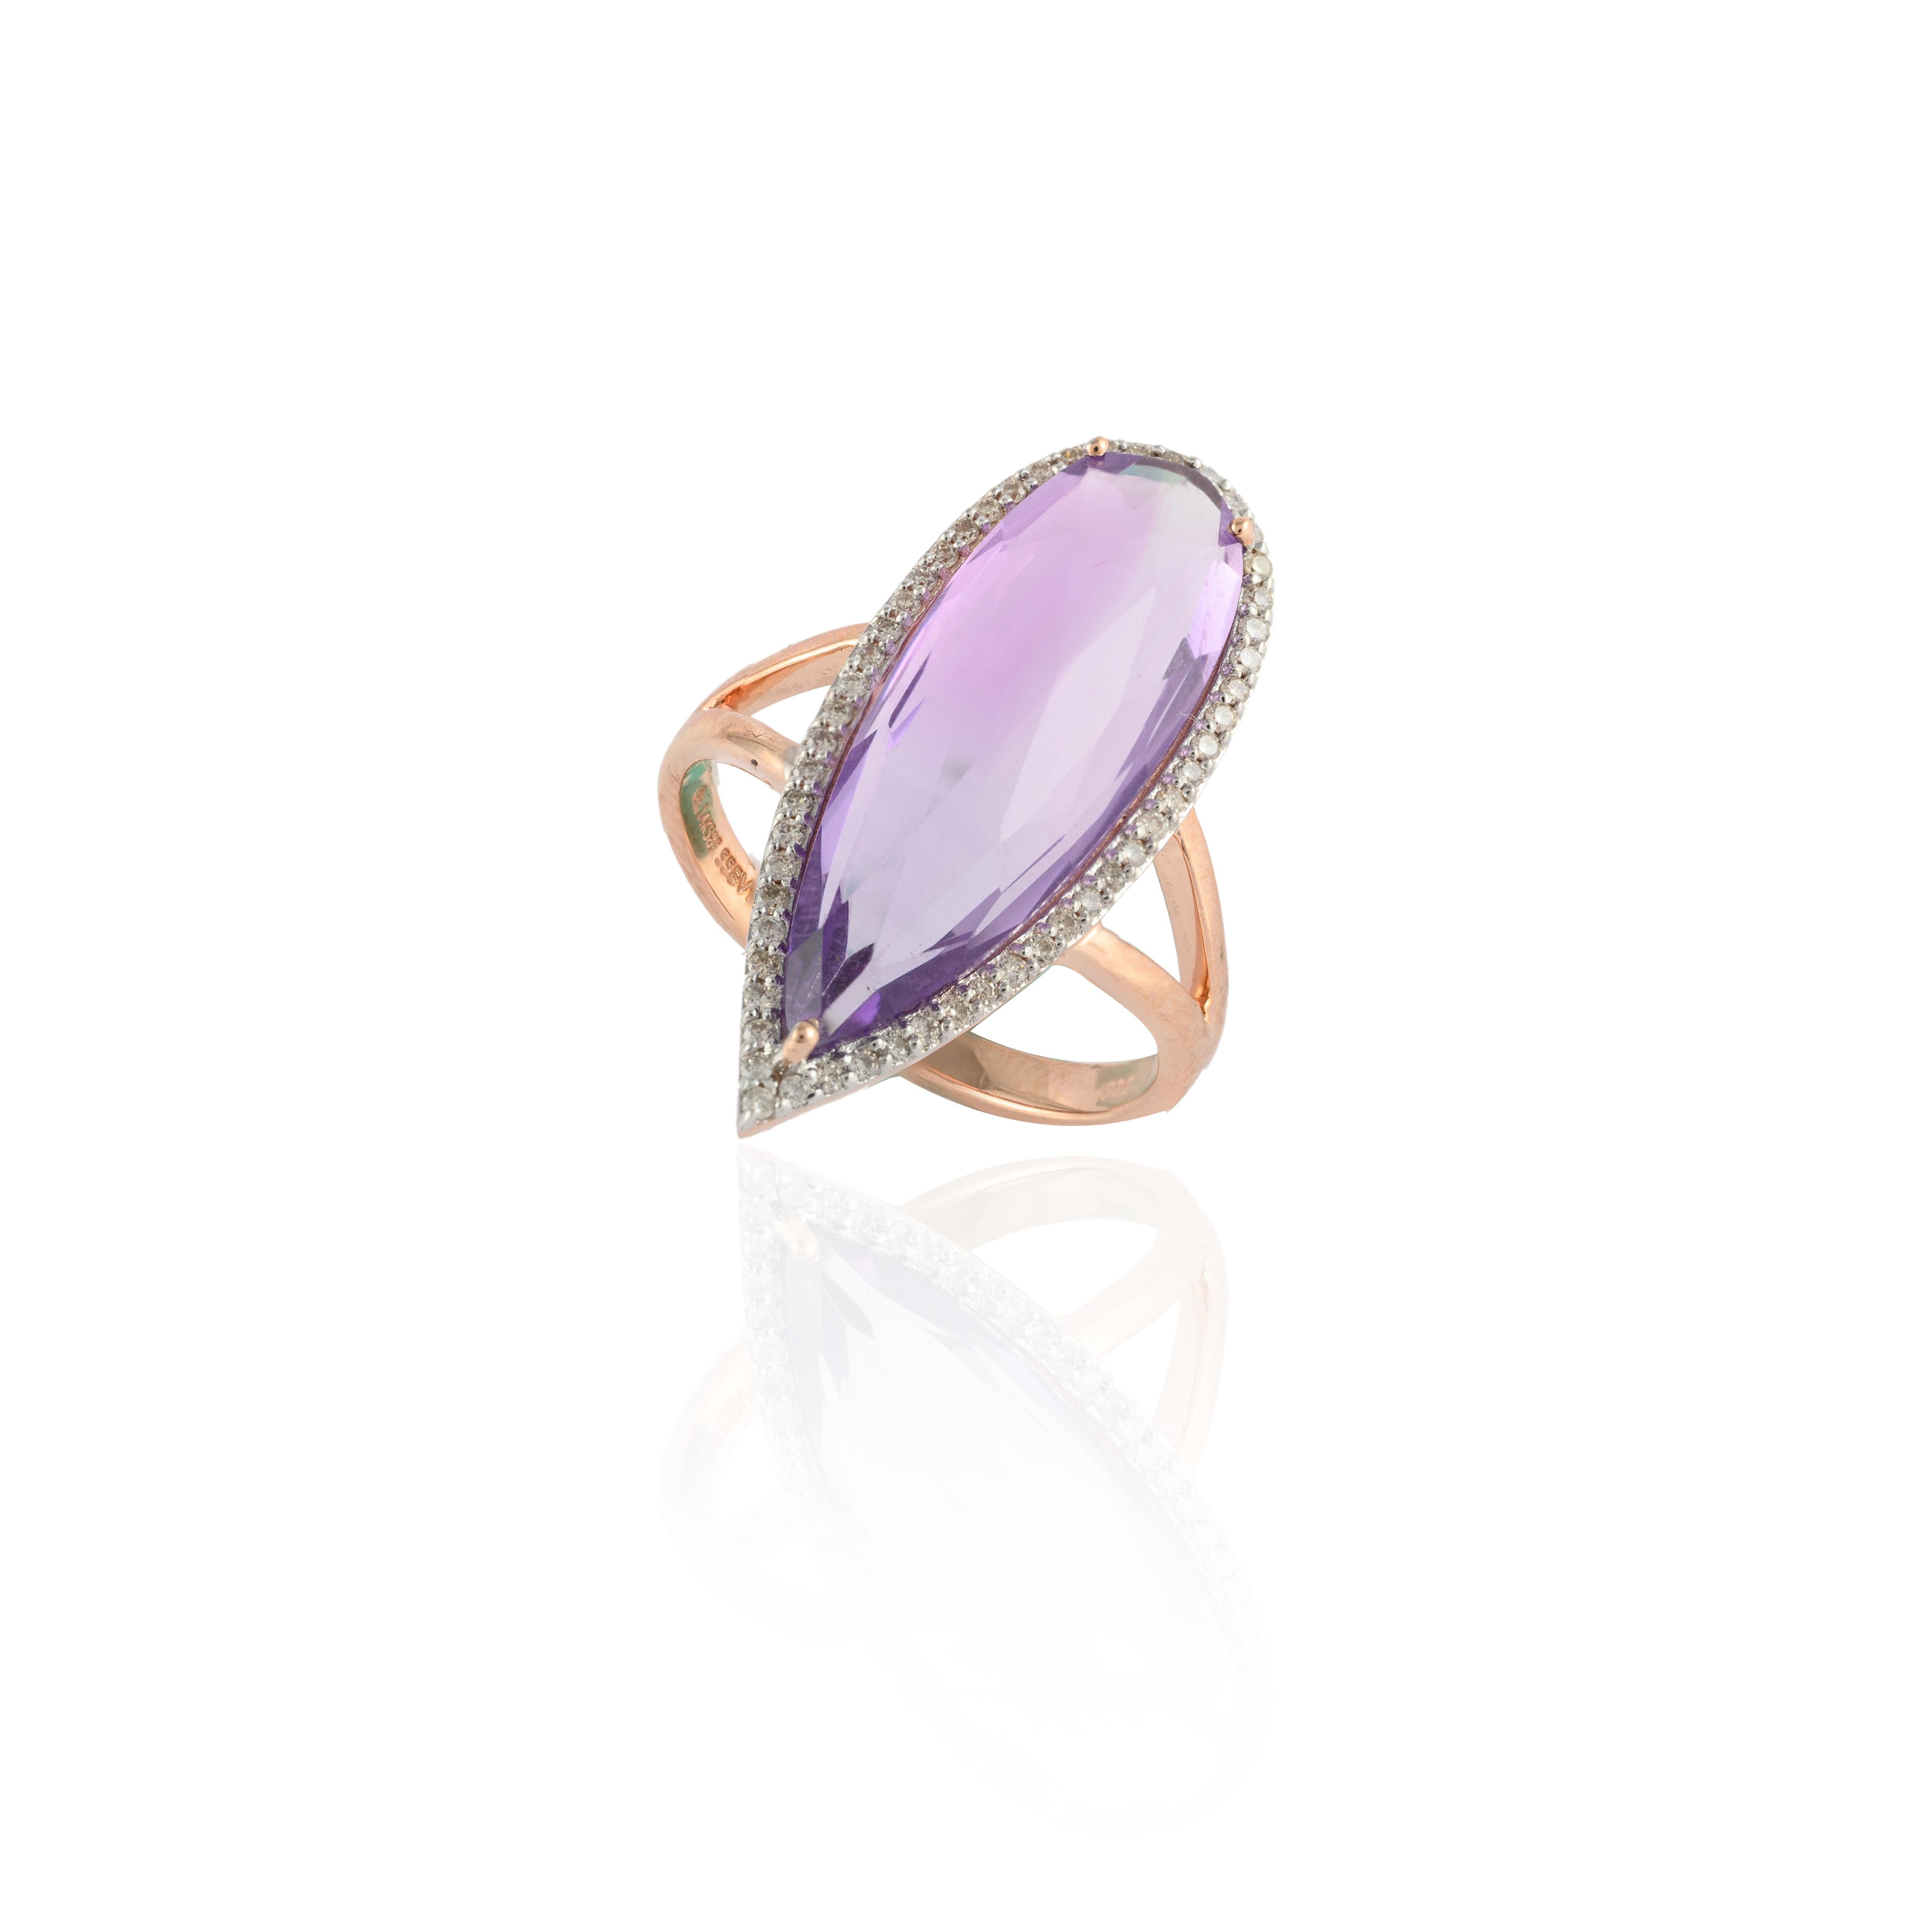 For Sale:  Crystal Clear Statement Amethyst Ring in 14k Rose Gold Settings & Halo Diamonds 9